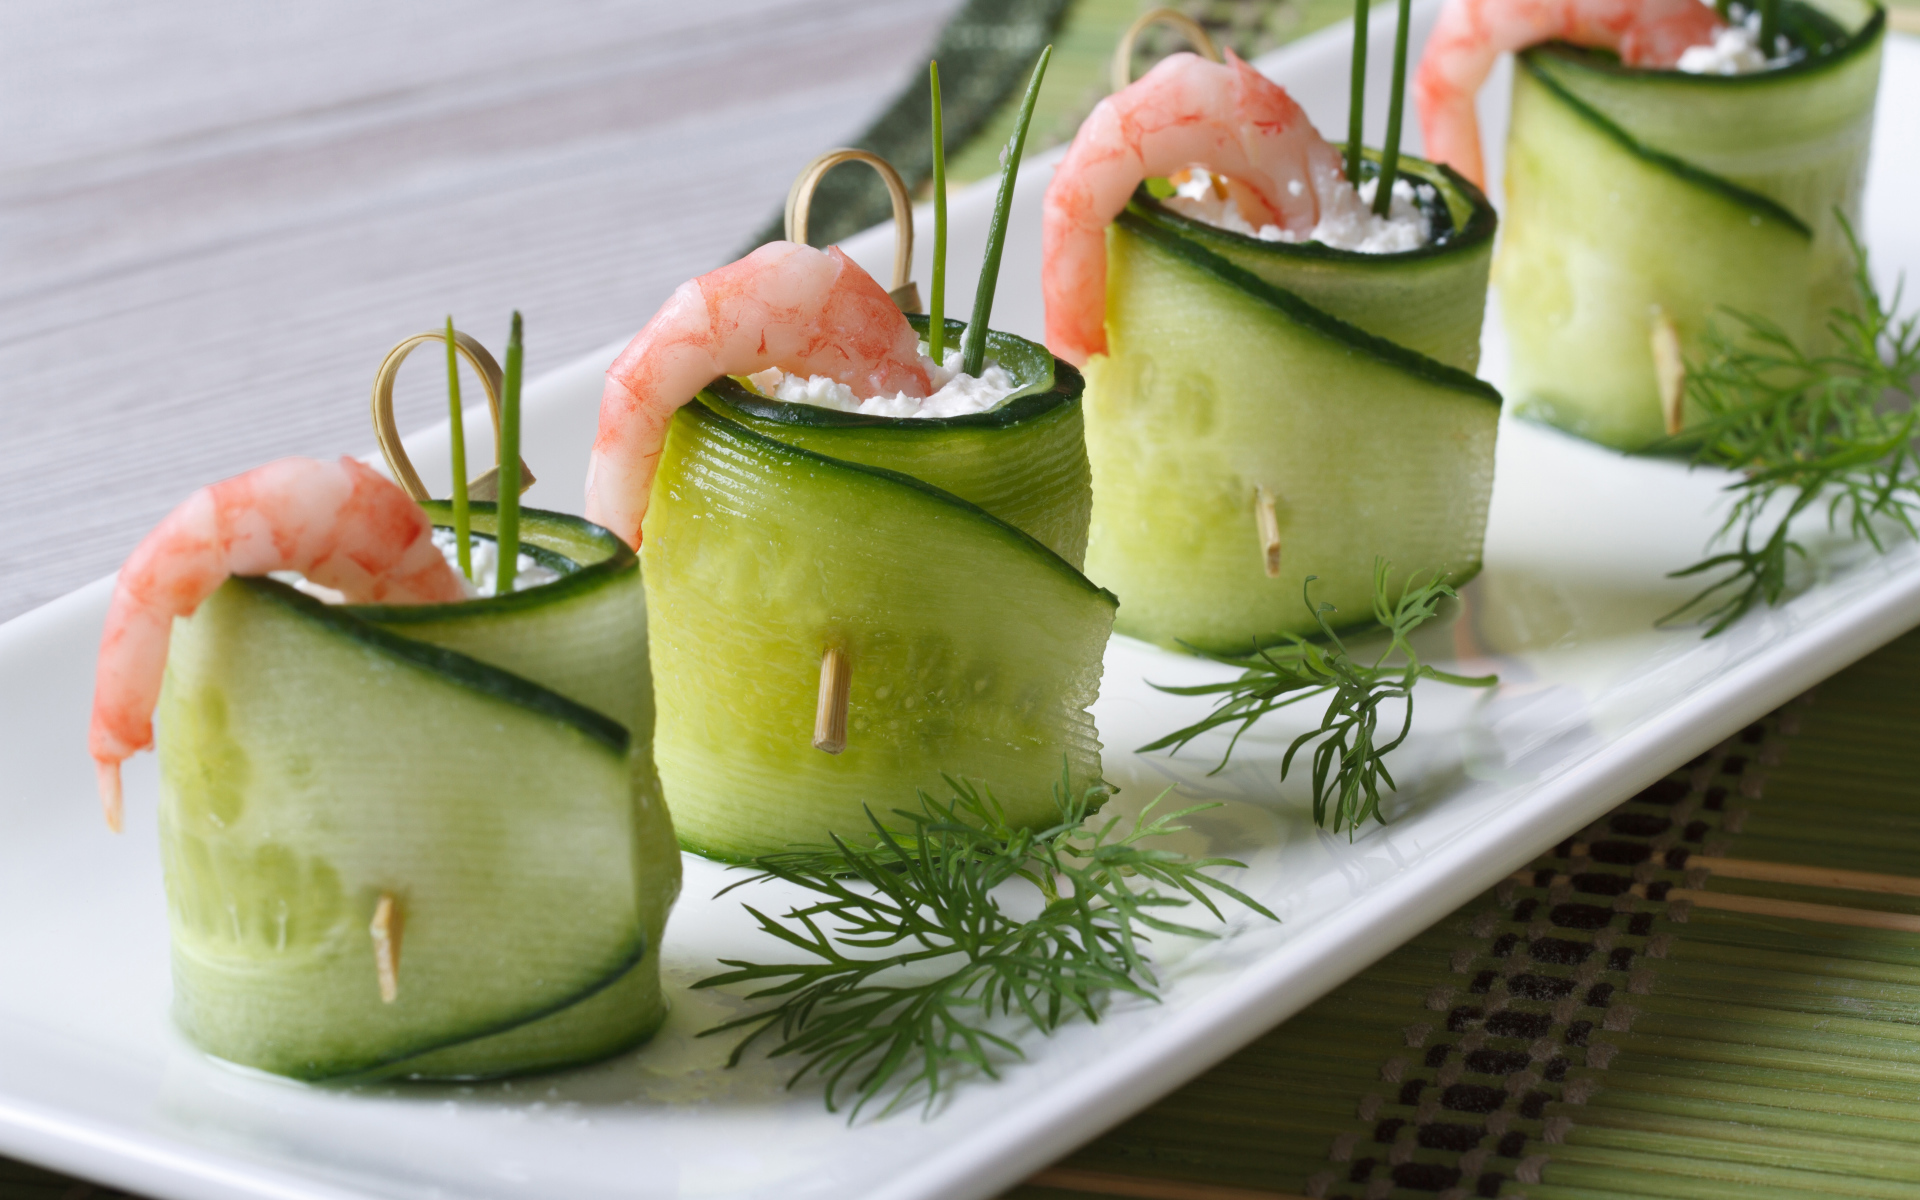 Cucumber rolls with shrimps and greens